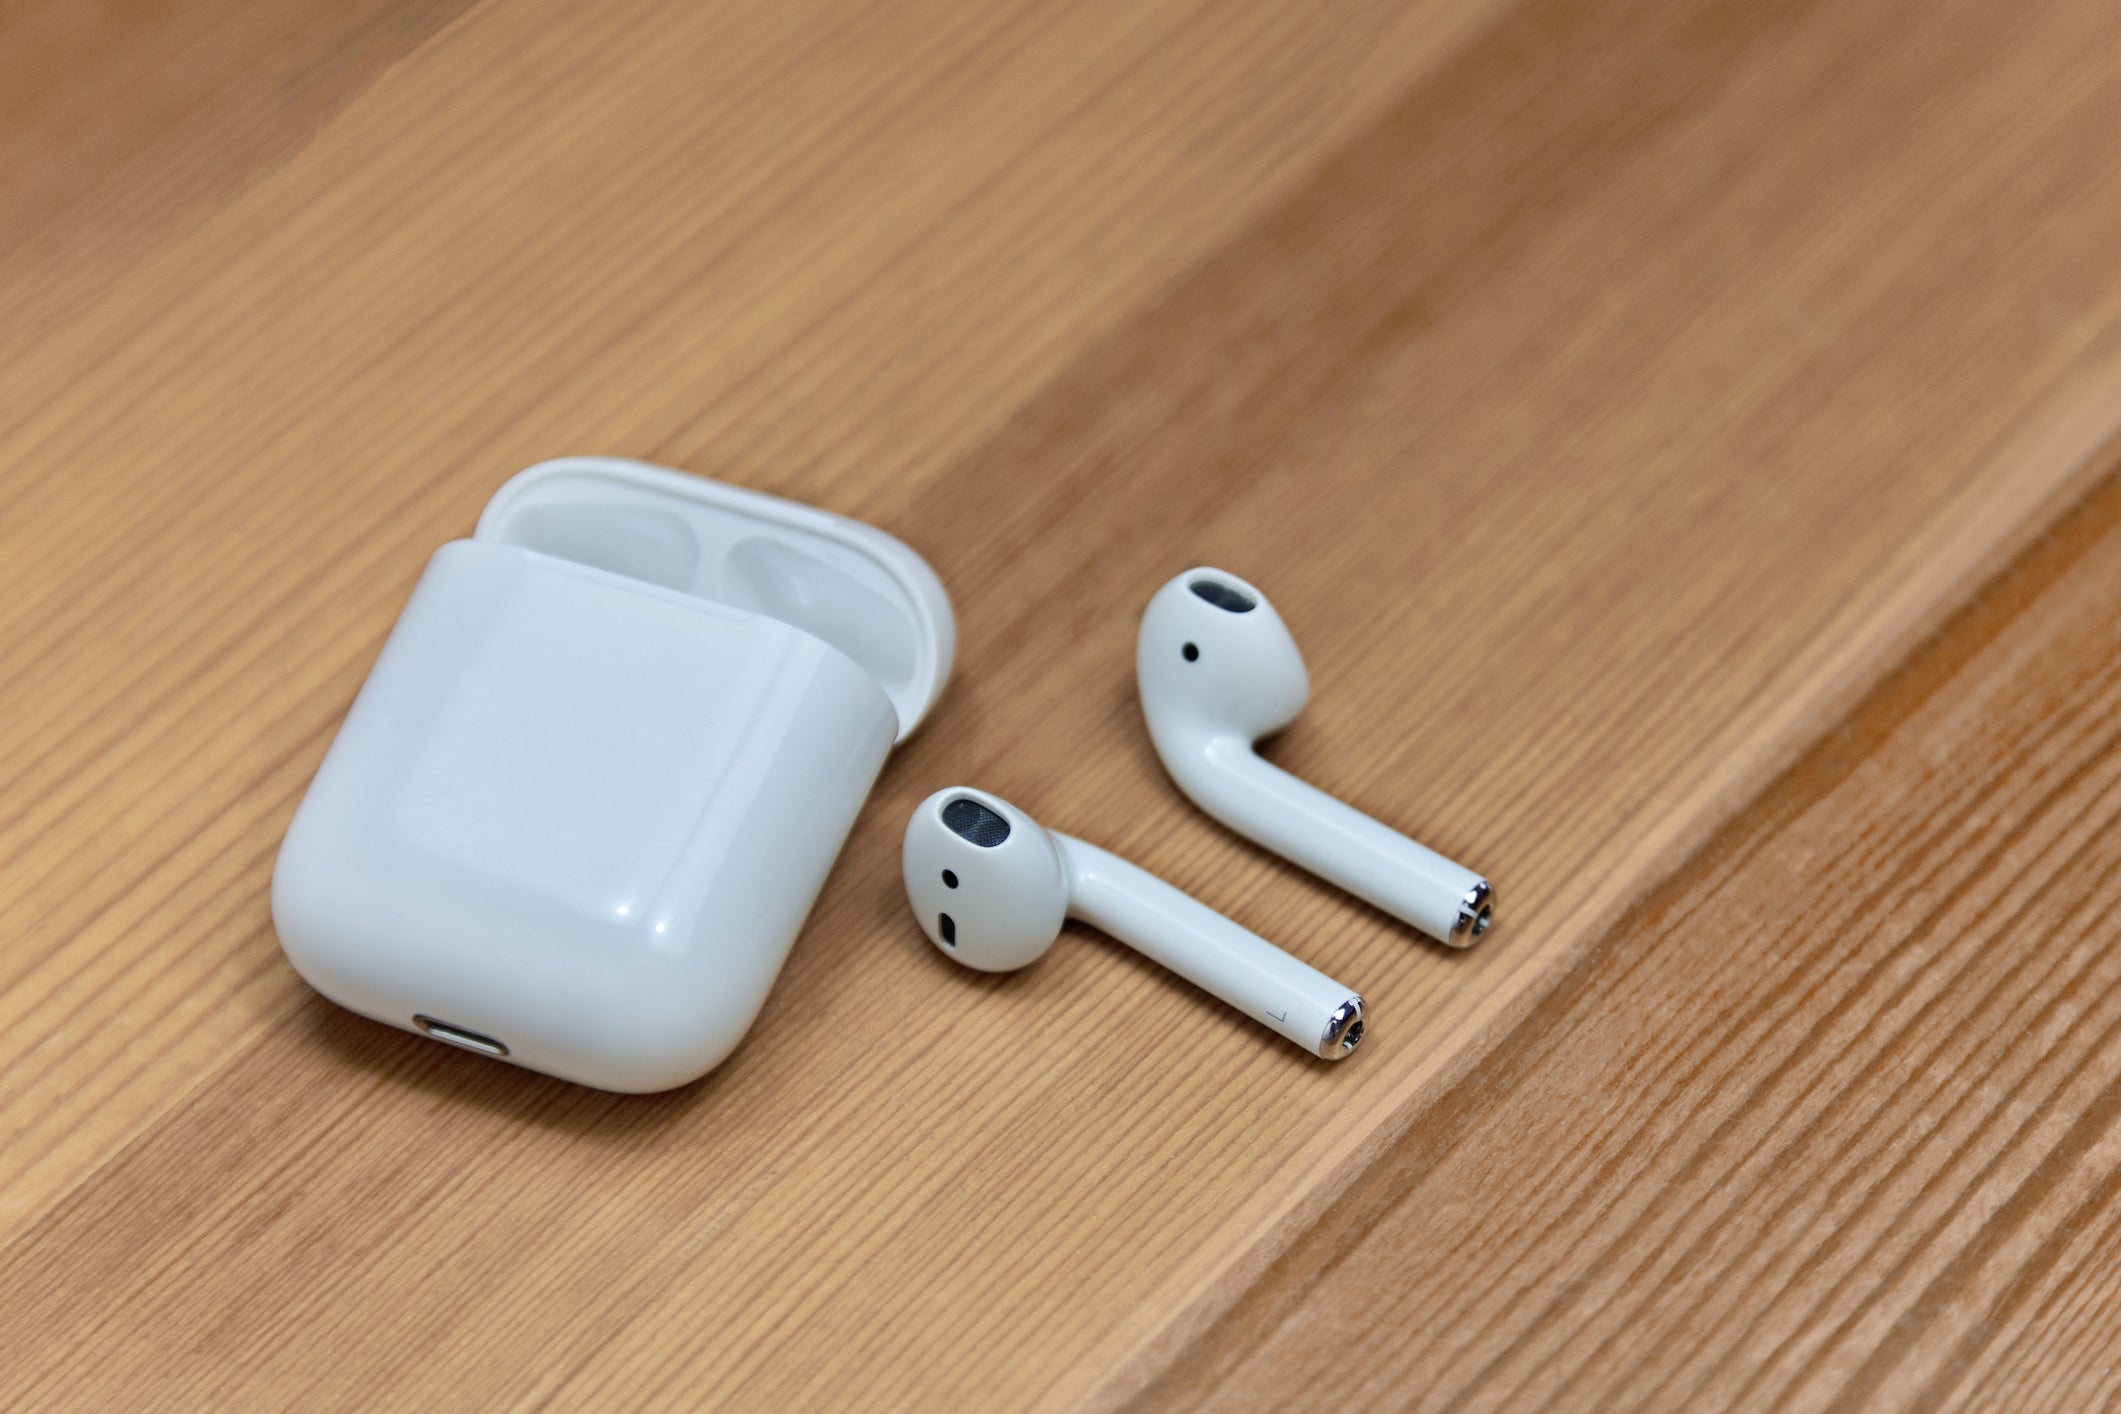 Walmart’s Black Friday deals are now live — including $69 AirPods